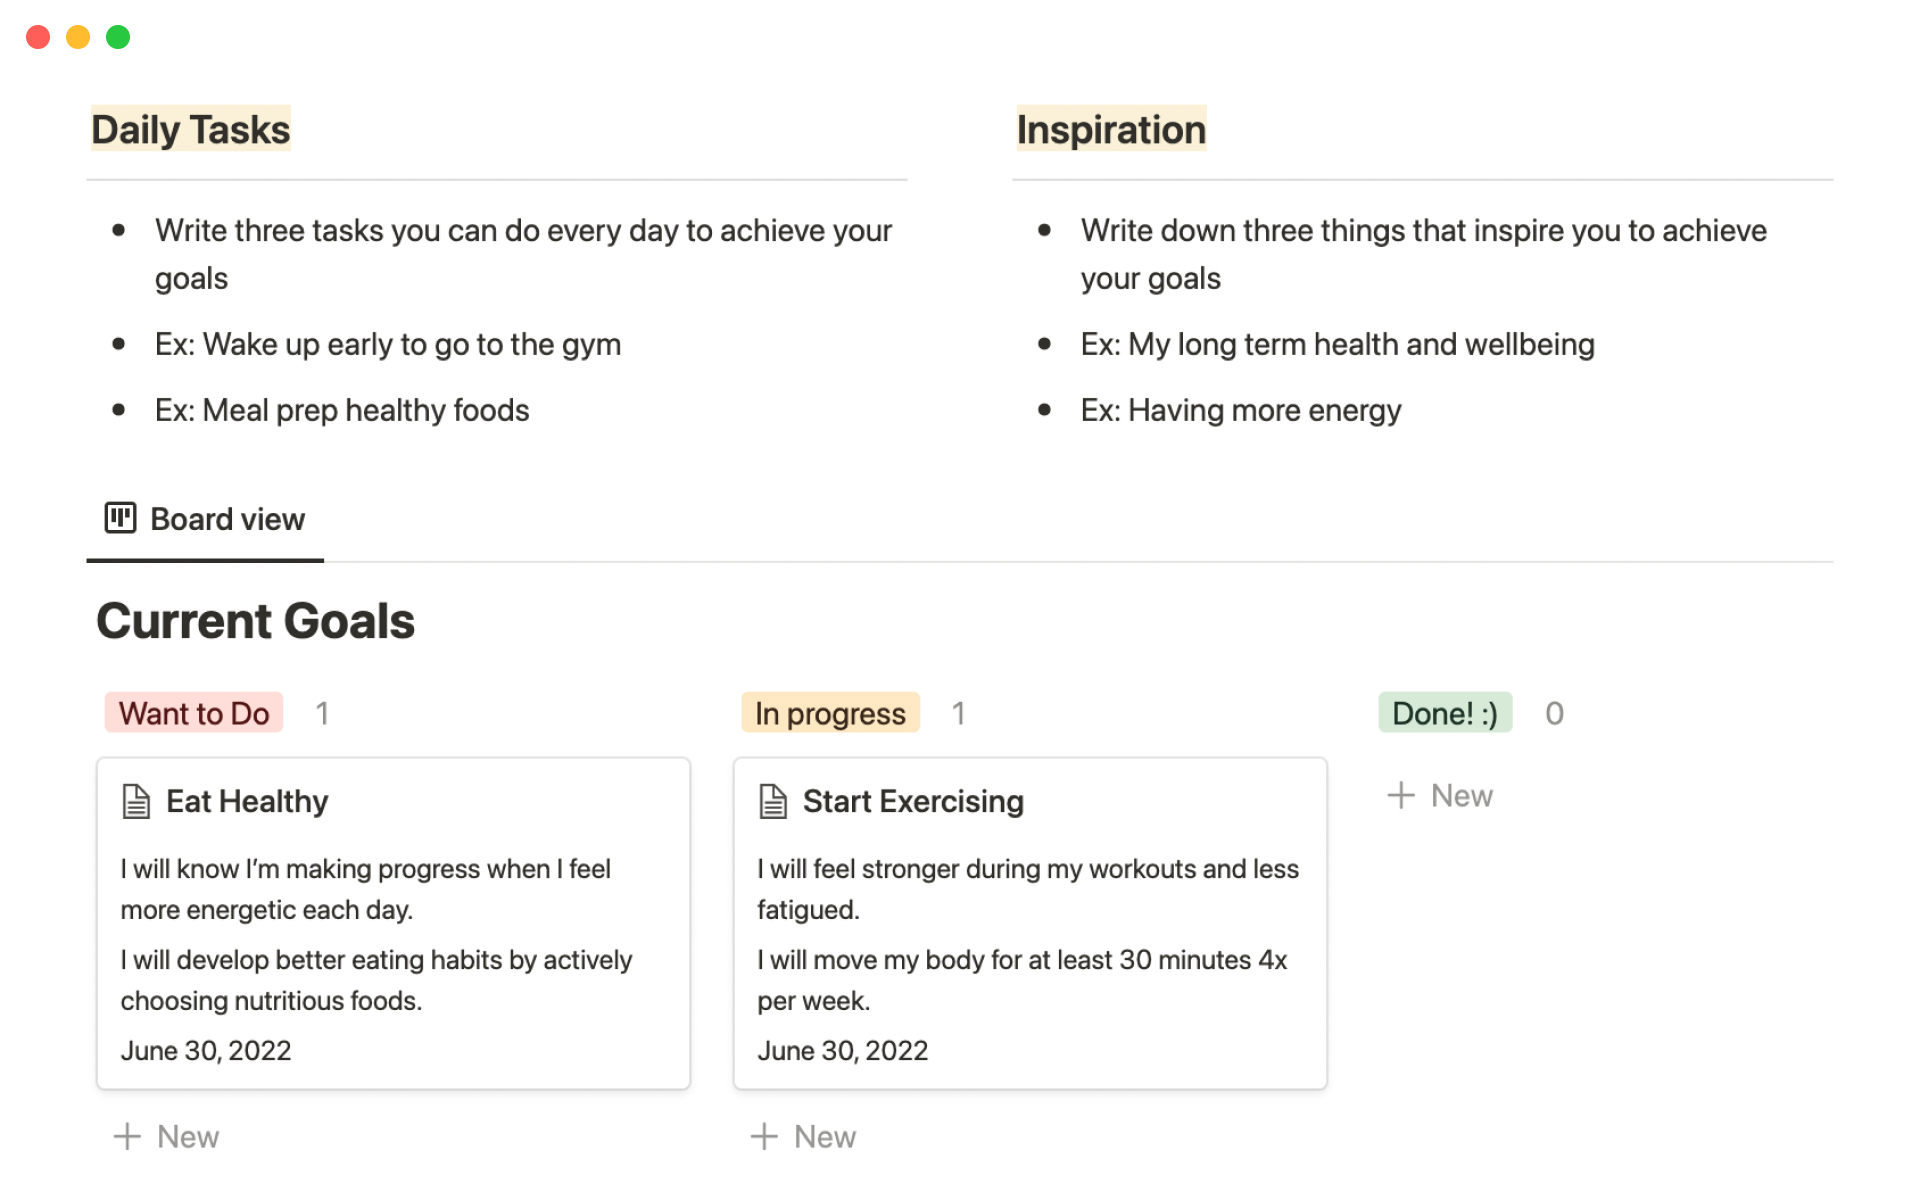 This template will help you plan, track, and meet your goals.